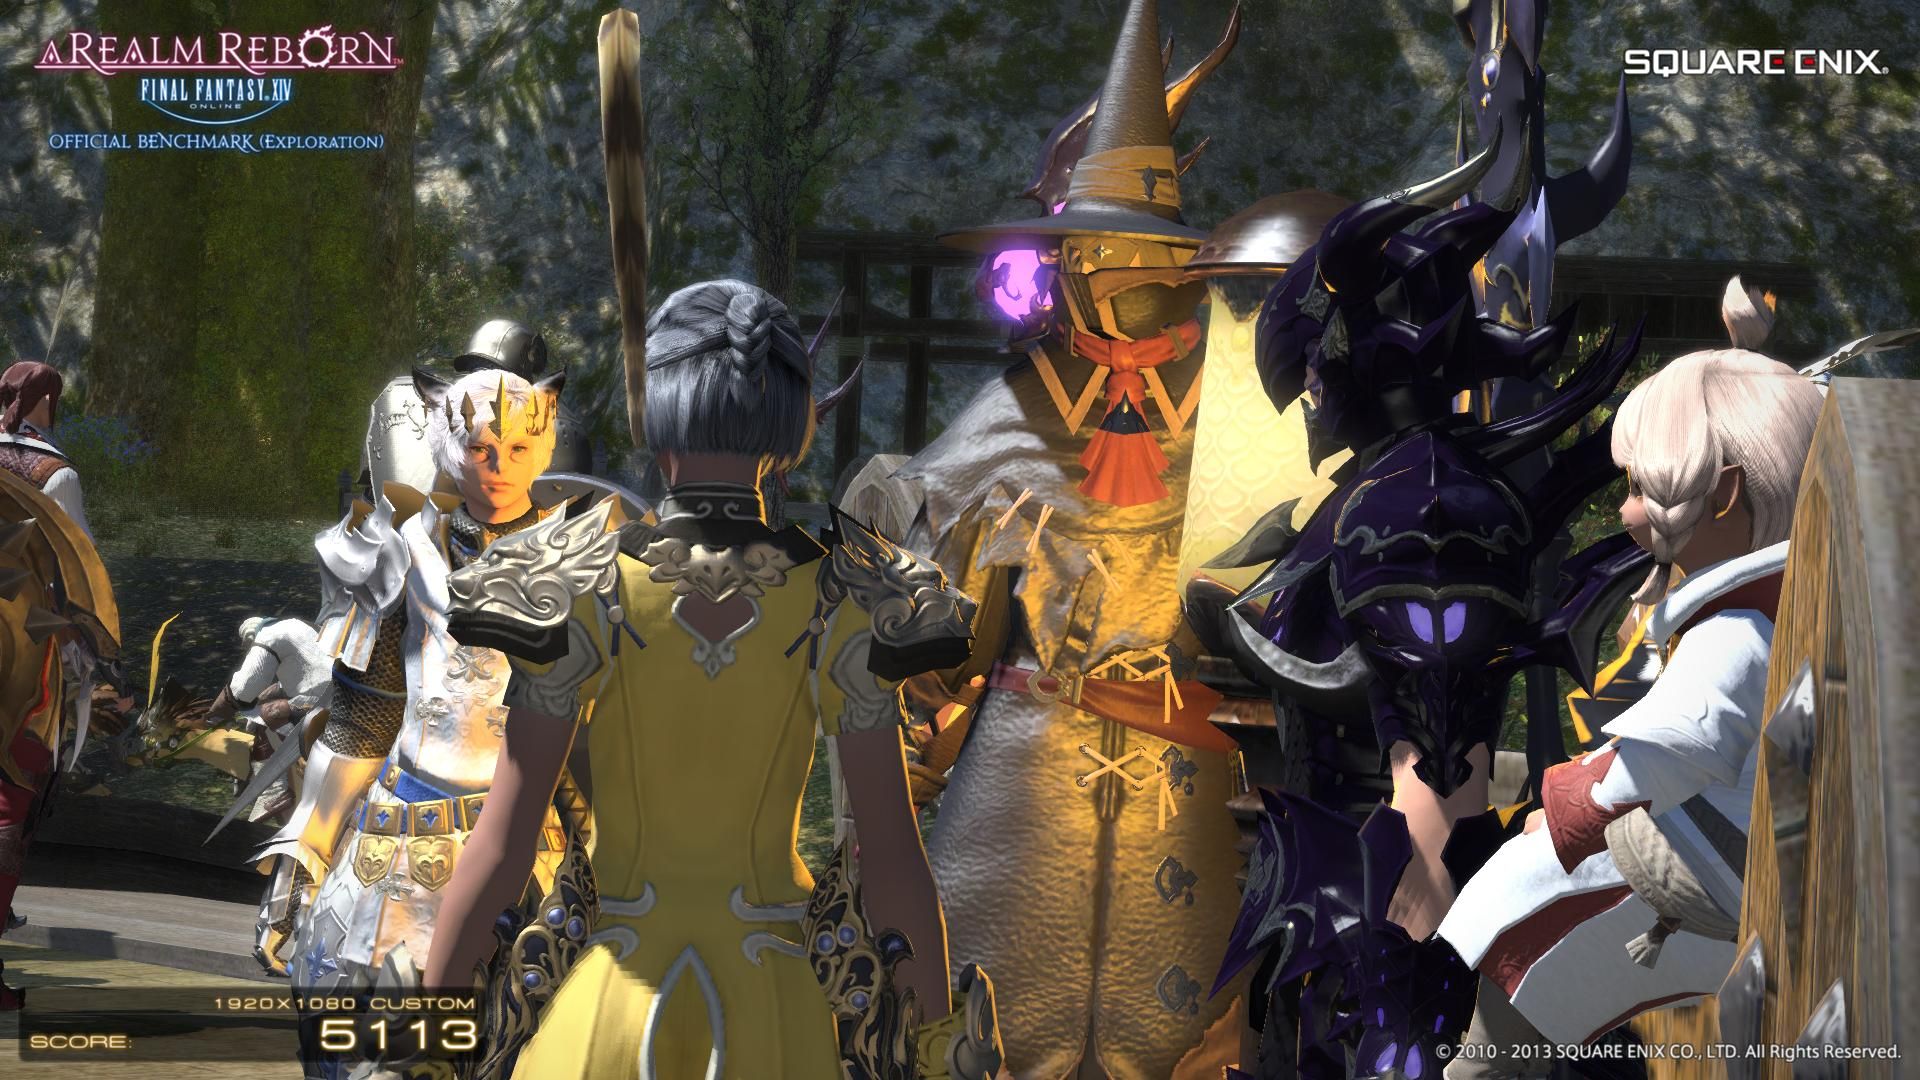 Final Fantasy Xiv A Realm Reborn Official Benchmark Gets An Update